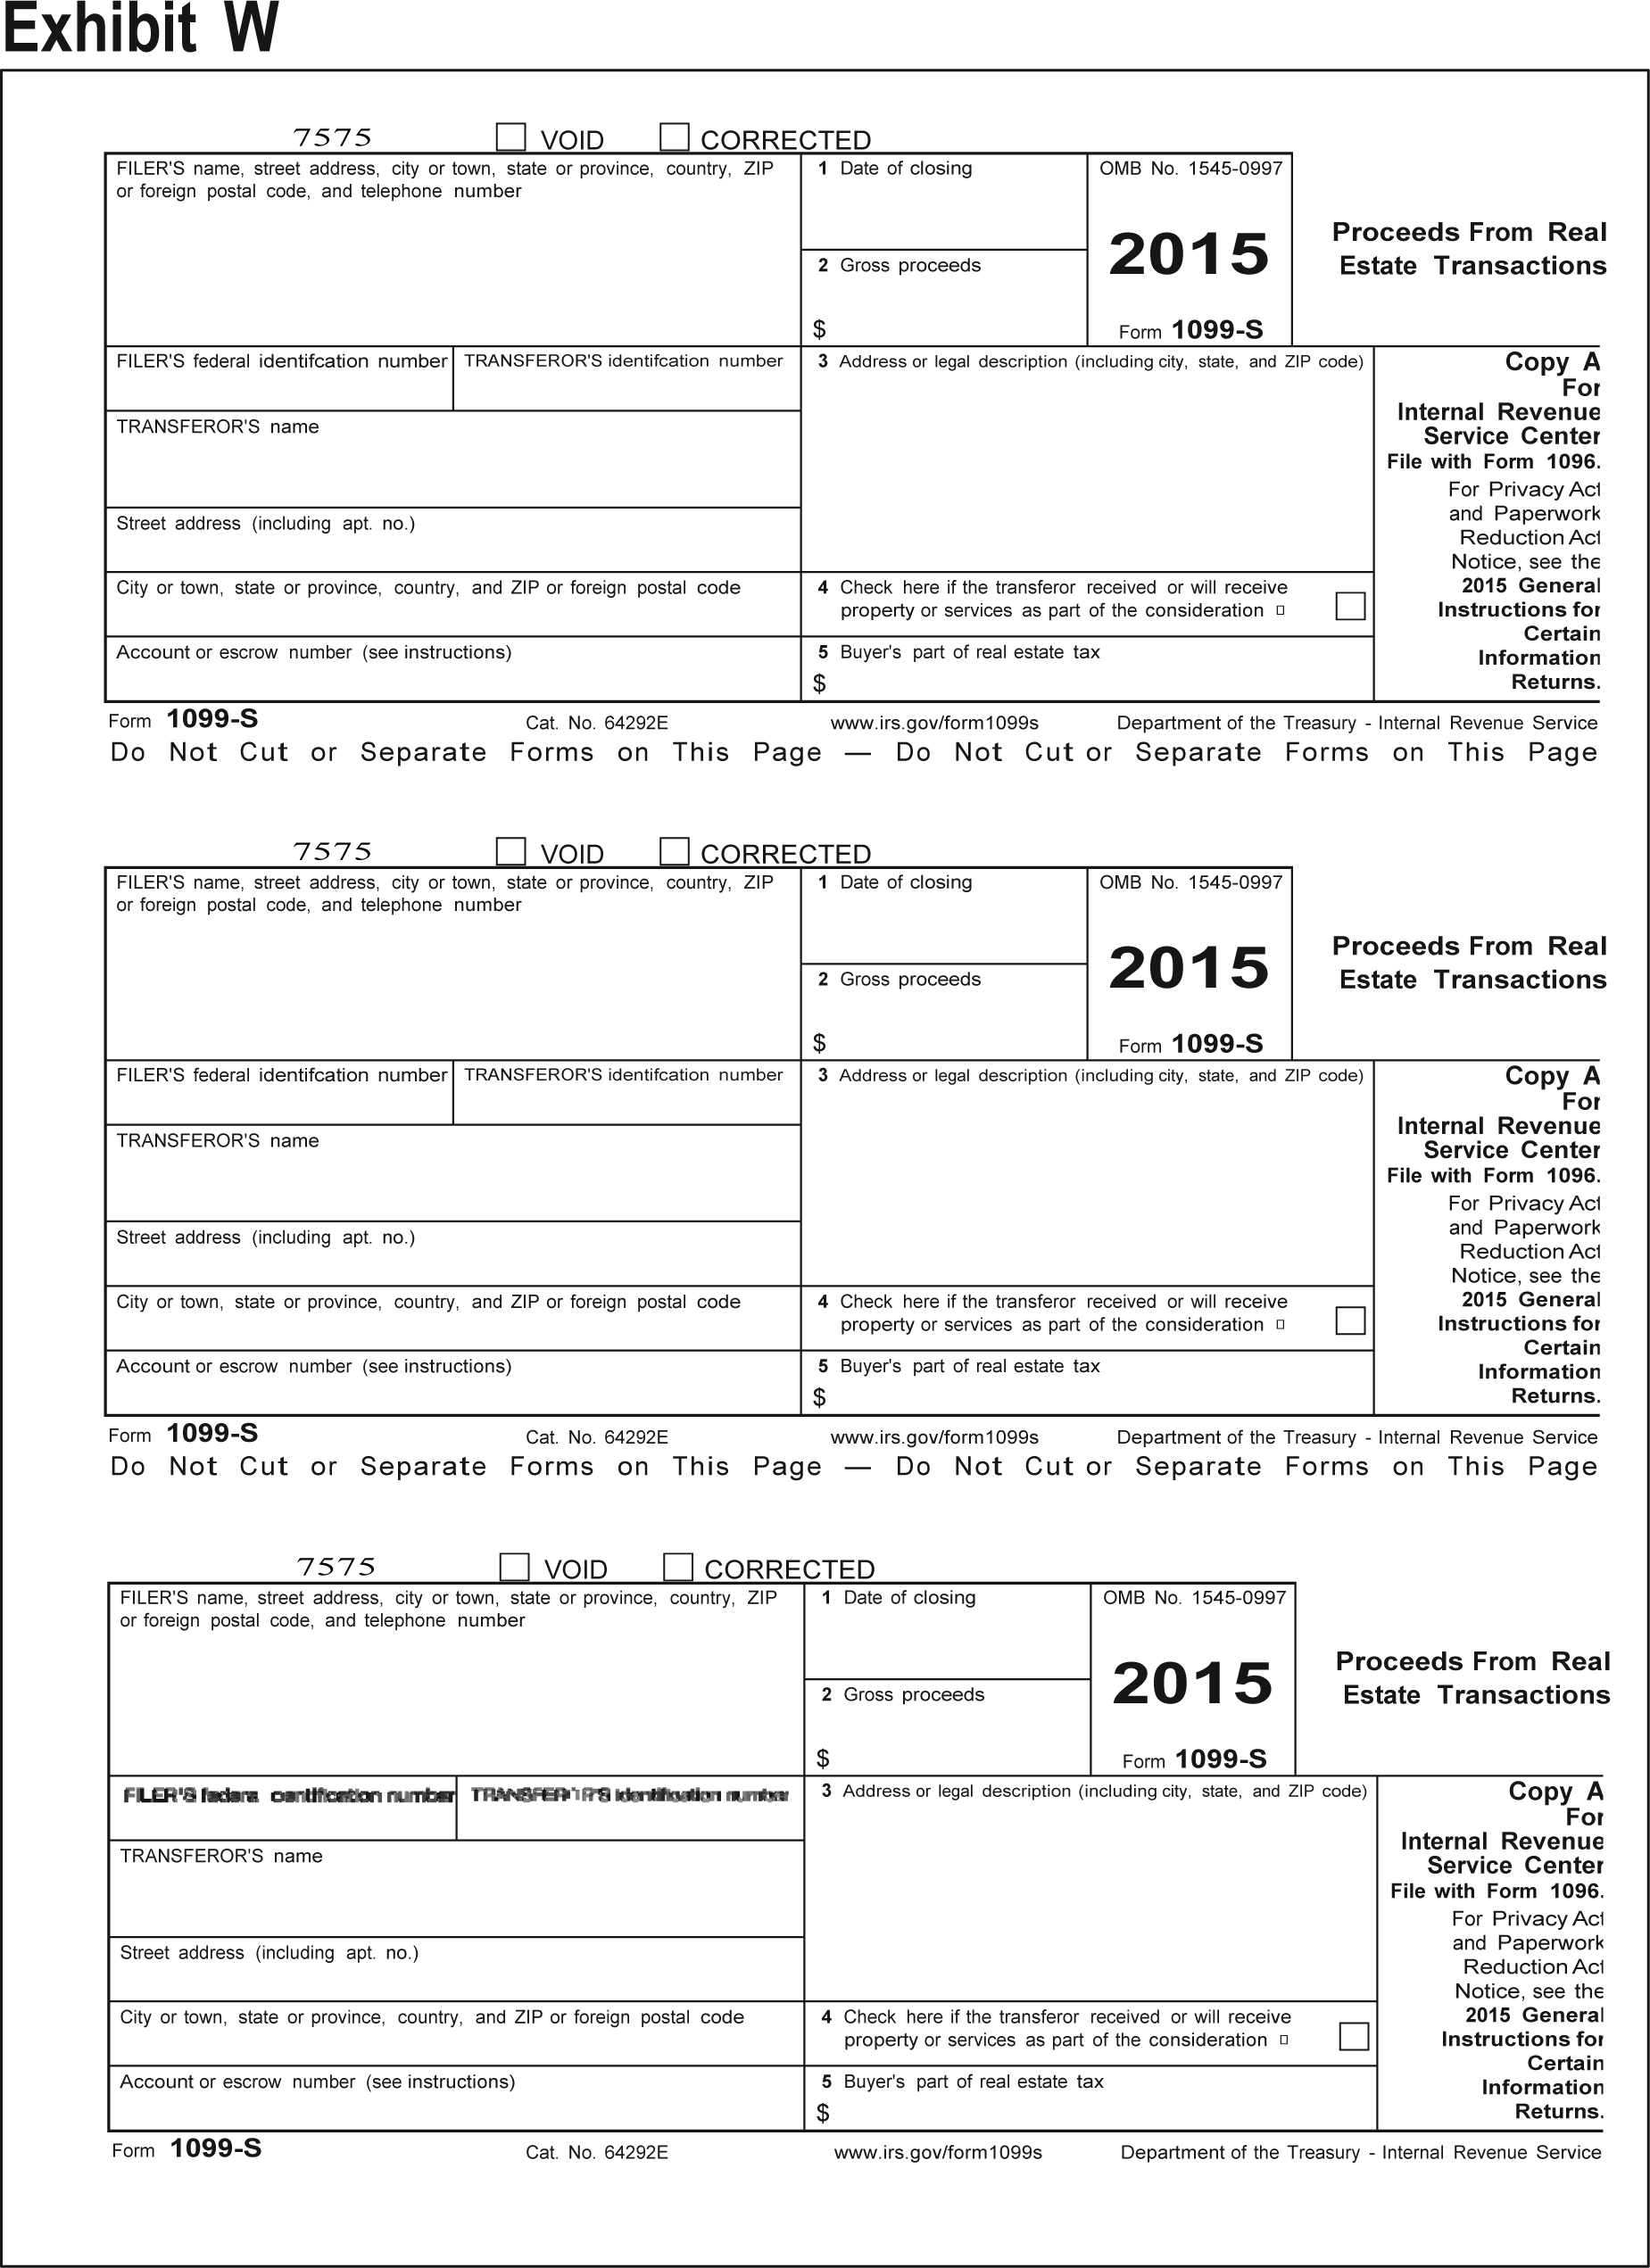 carbonless 6-part 2015 IRS Tax Form 1099-R single sheet set for 2 recipients